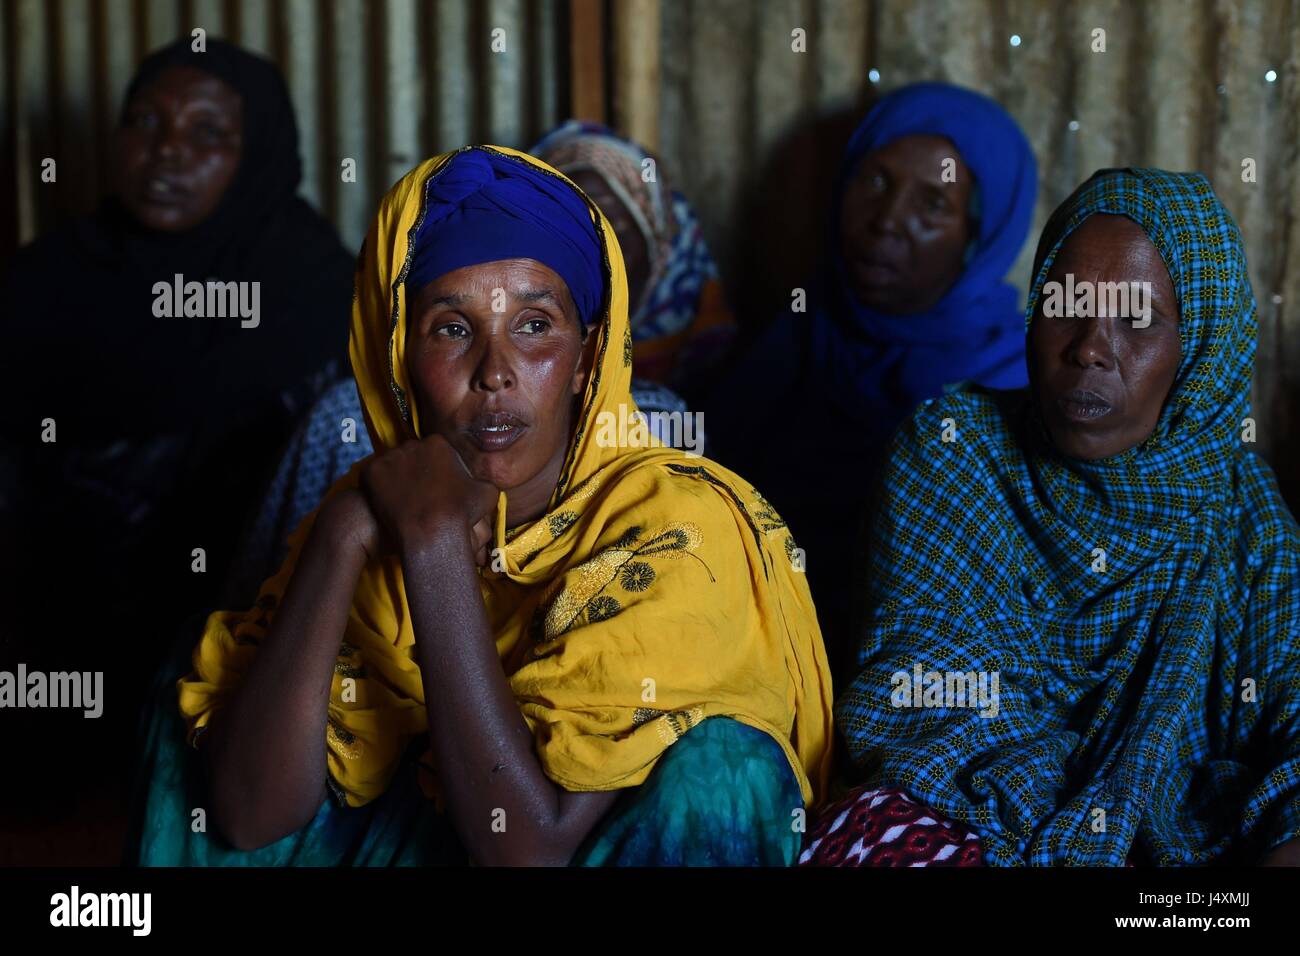 Woman are pictured in an internally displaced person (IDP) camp in Hargeisa, Somaliland where families have had to leave their homes in villages move to the city in order to find food and water after recent drought. Stock Photo